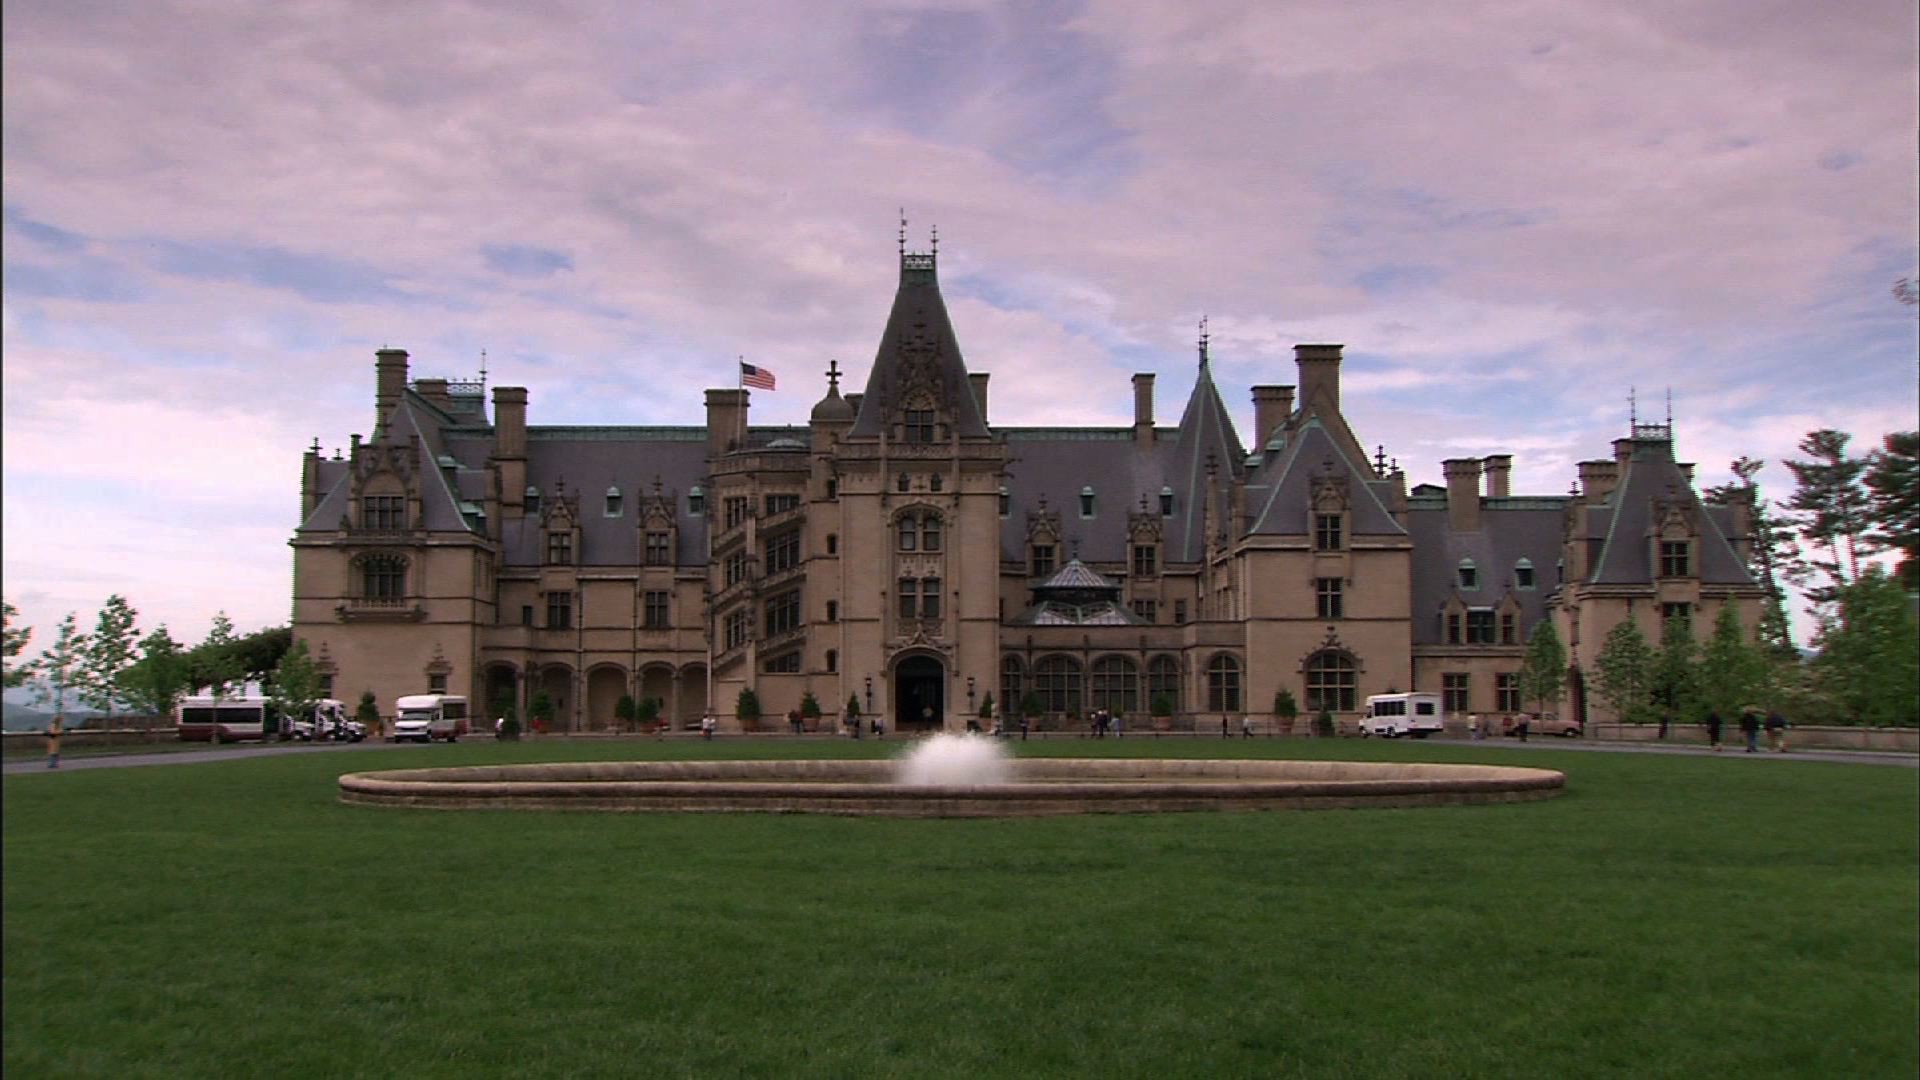 1920x1080 Video: NC Now Special: Biltmore Estate & Downton Abbey | Watch NC Now  Online | The University of North Carolina Center for Public Television Video